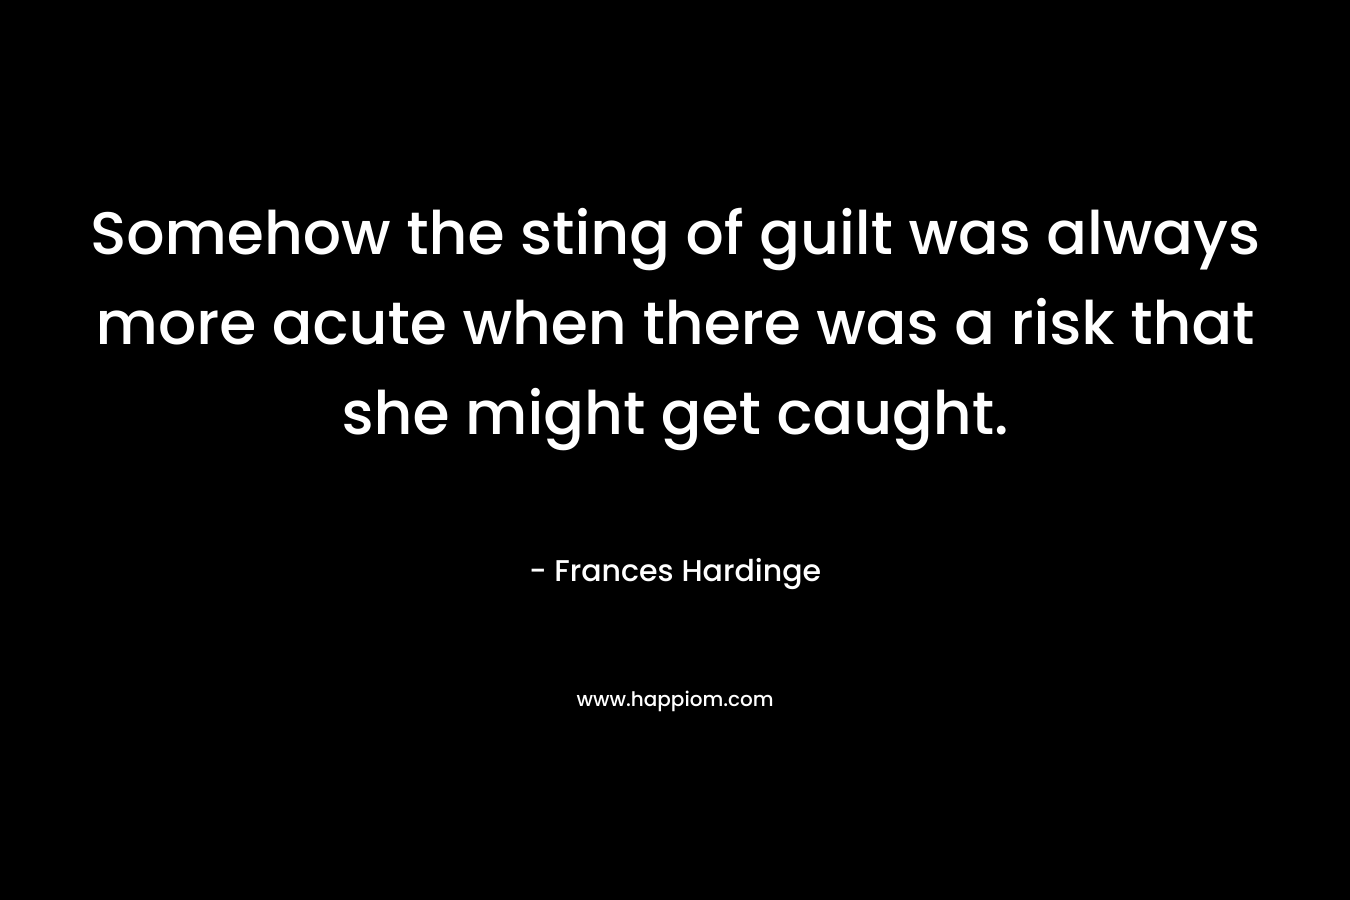 Somehow the sting of guilt was always more acute when there was a risk that she might get caught. – Frances Hardinge